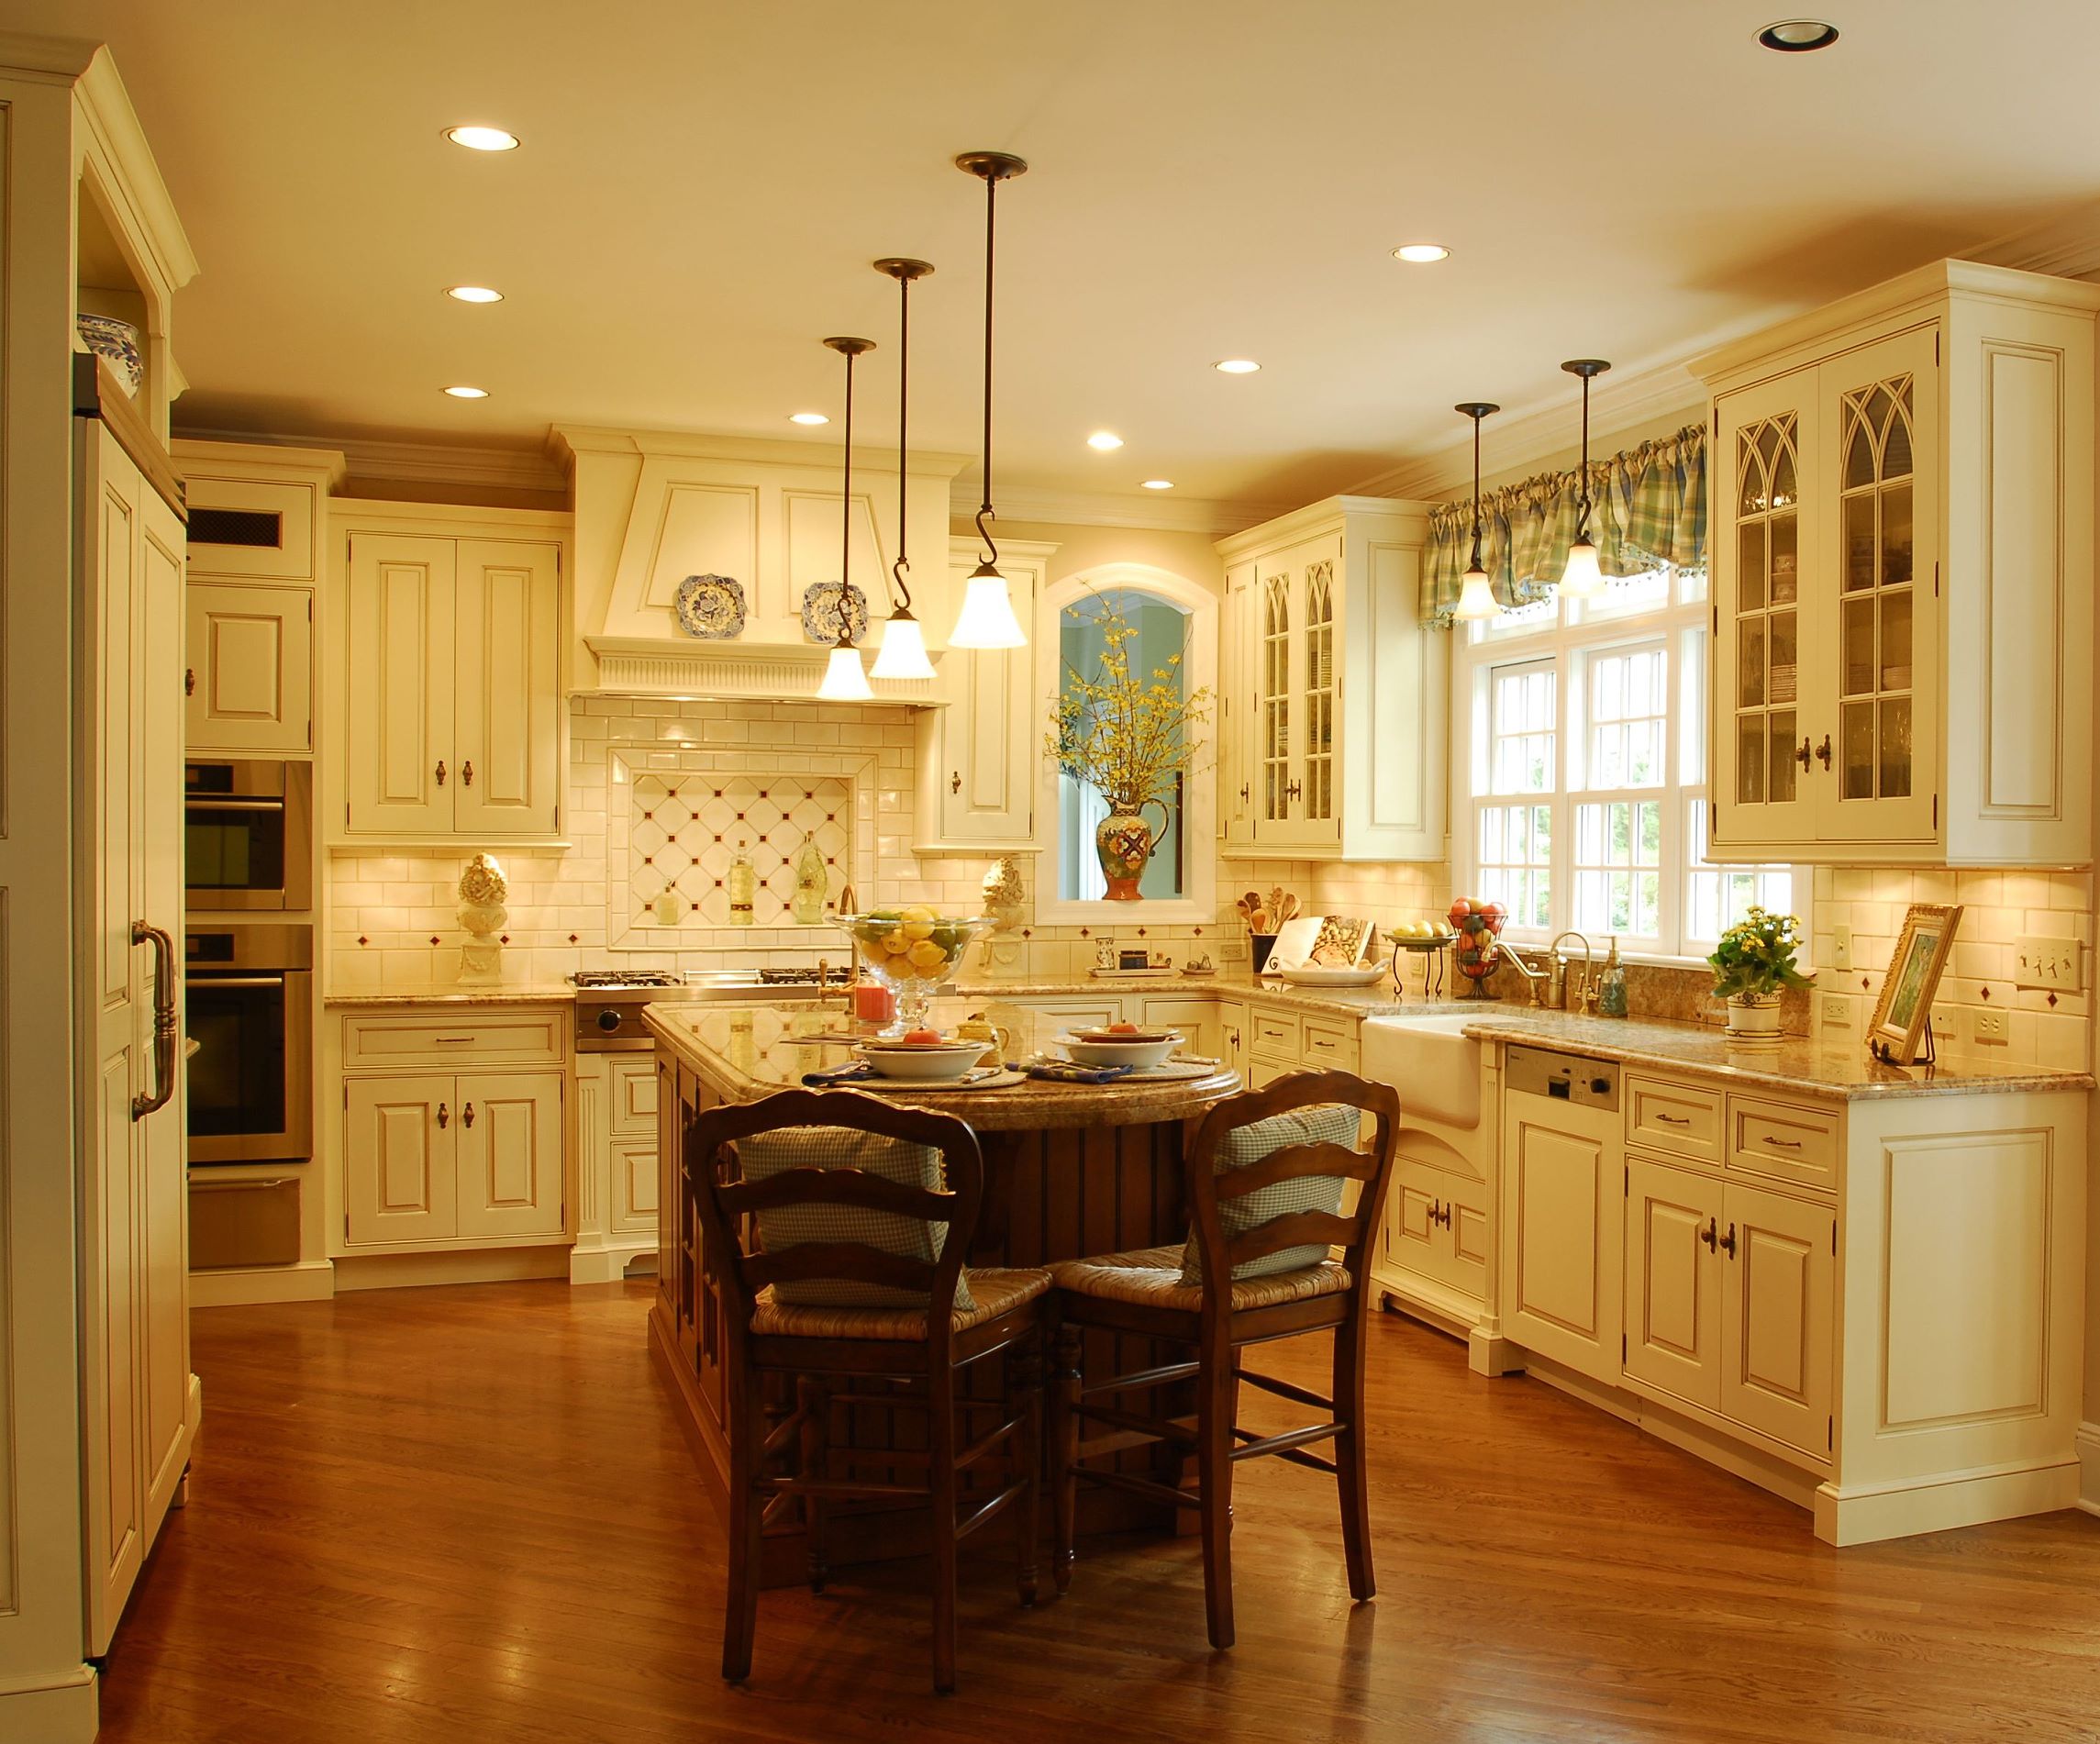 traditional kitchen kitchens style cabinetry craft designs cabinets custom beautiful awesome american maid island enduring small styles tradional cabinet country